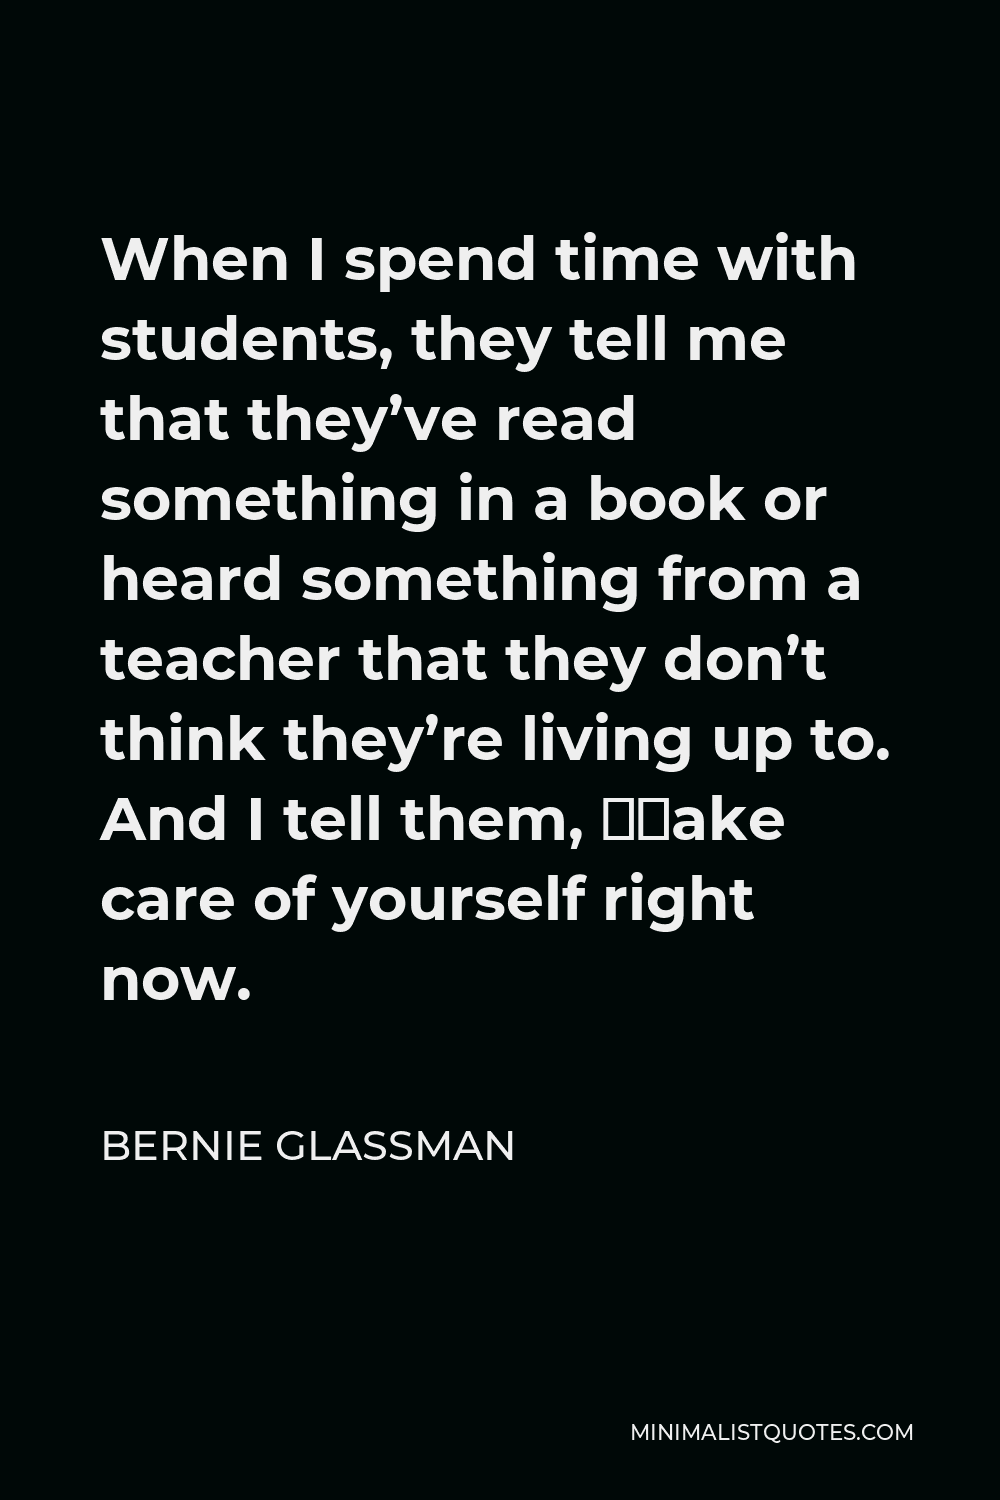 Bernie Glassman Quote - When I spend time with students, they tell me that they’ve read something in a book or heard something from a teacher that they don’t think they’re living up to. And I tell them, “Take care of yourself right now.